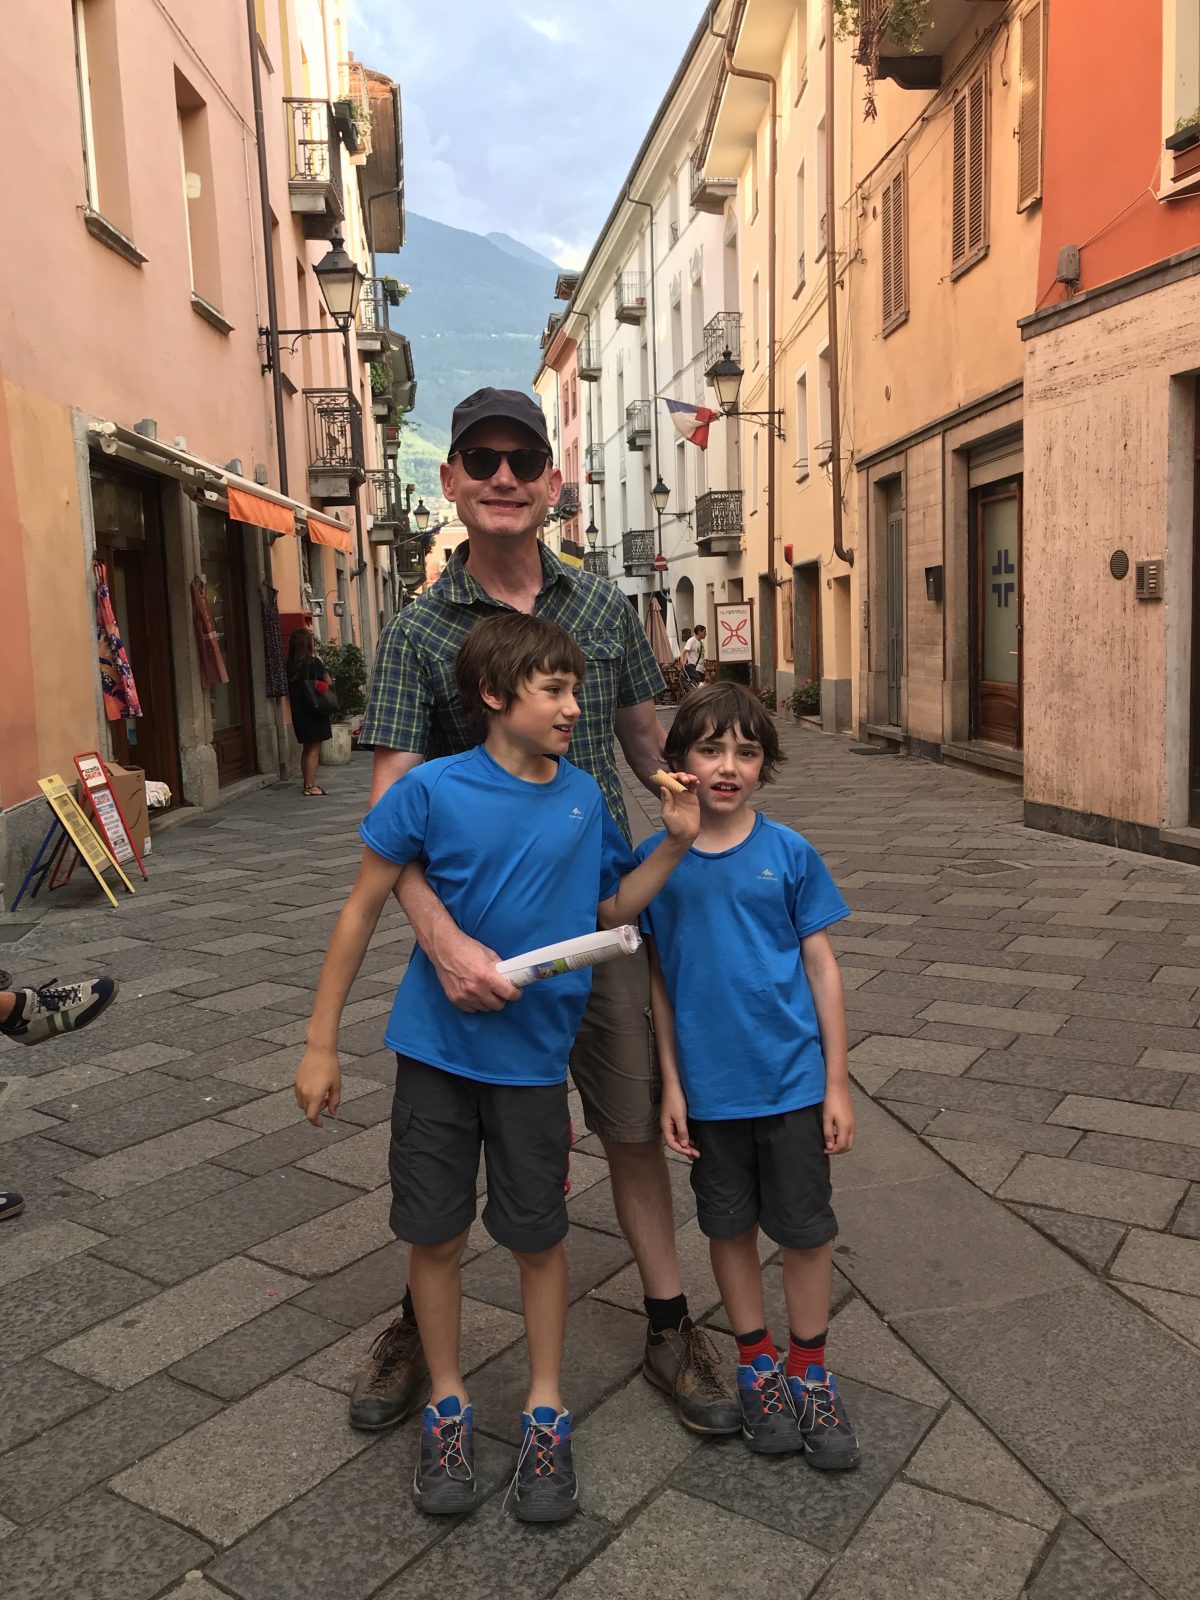 A quick walk through Aosta downtown to get a nice 'gelato'. Our family hike in Pila during the past summer holiday